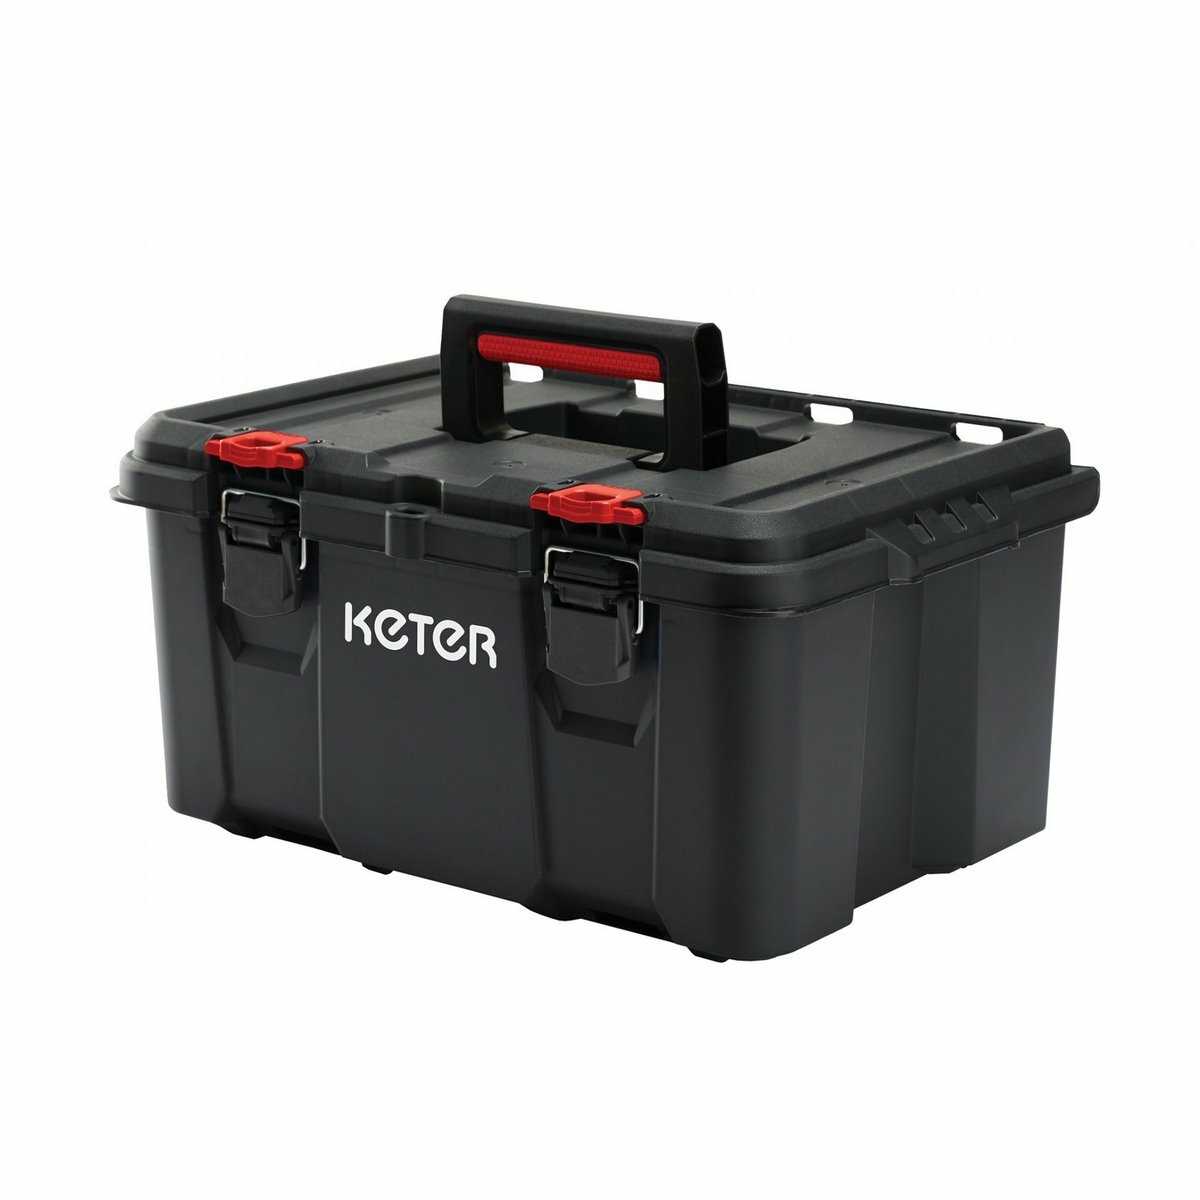 Keter Stack’N’Roll Toolbox 525x345x260mm 251492 Keter